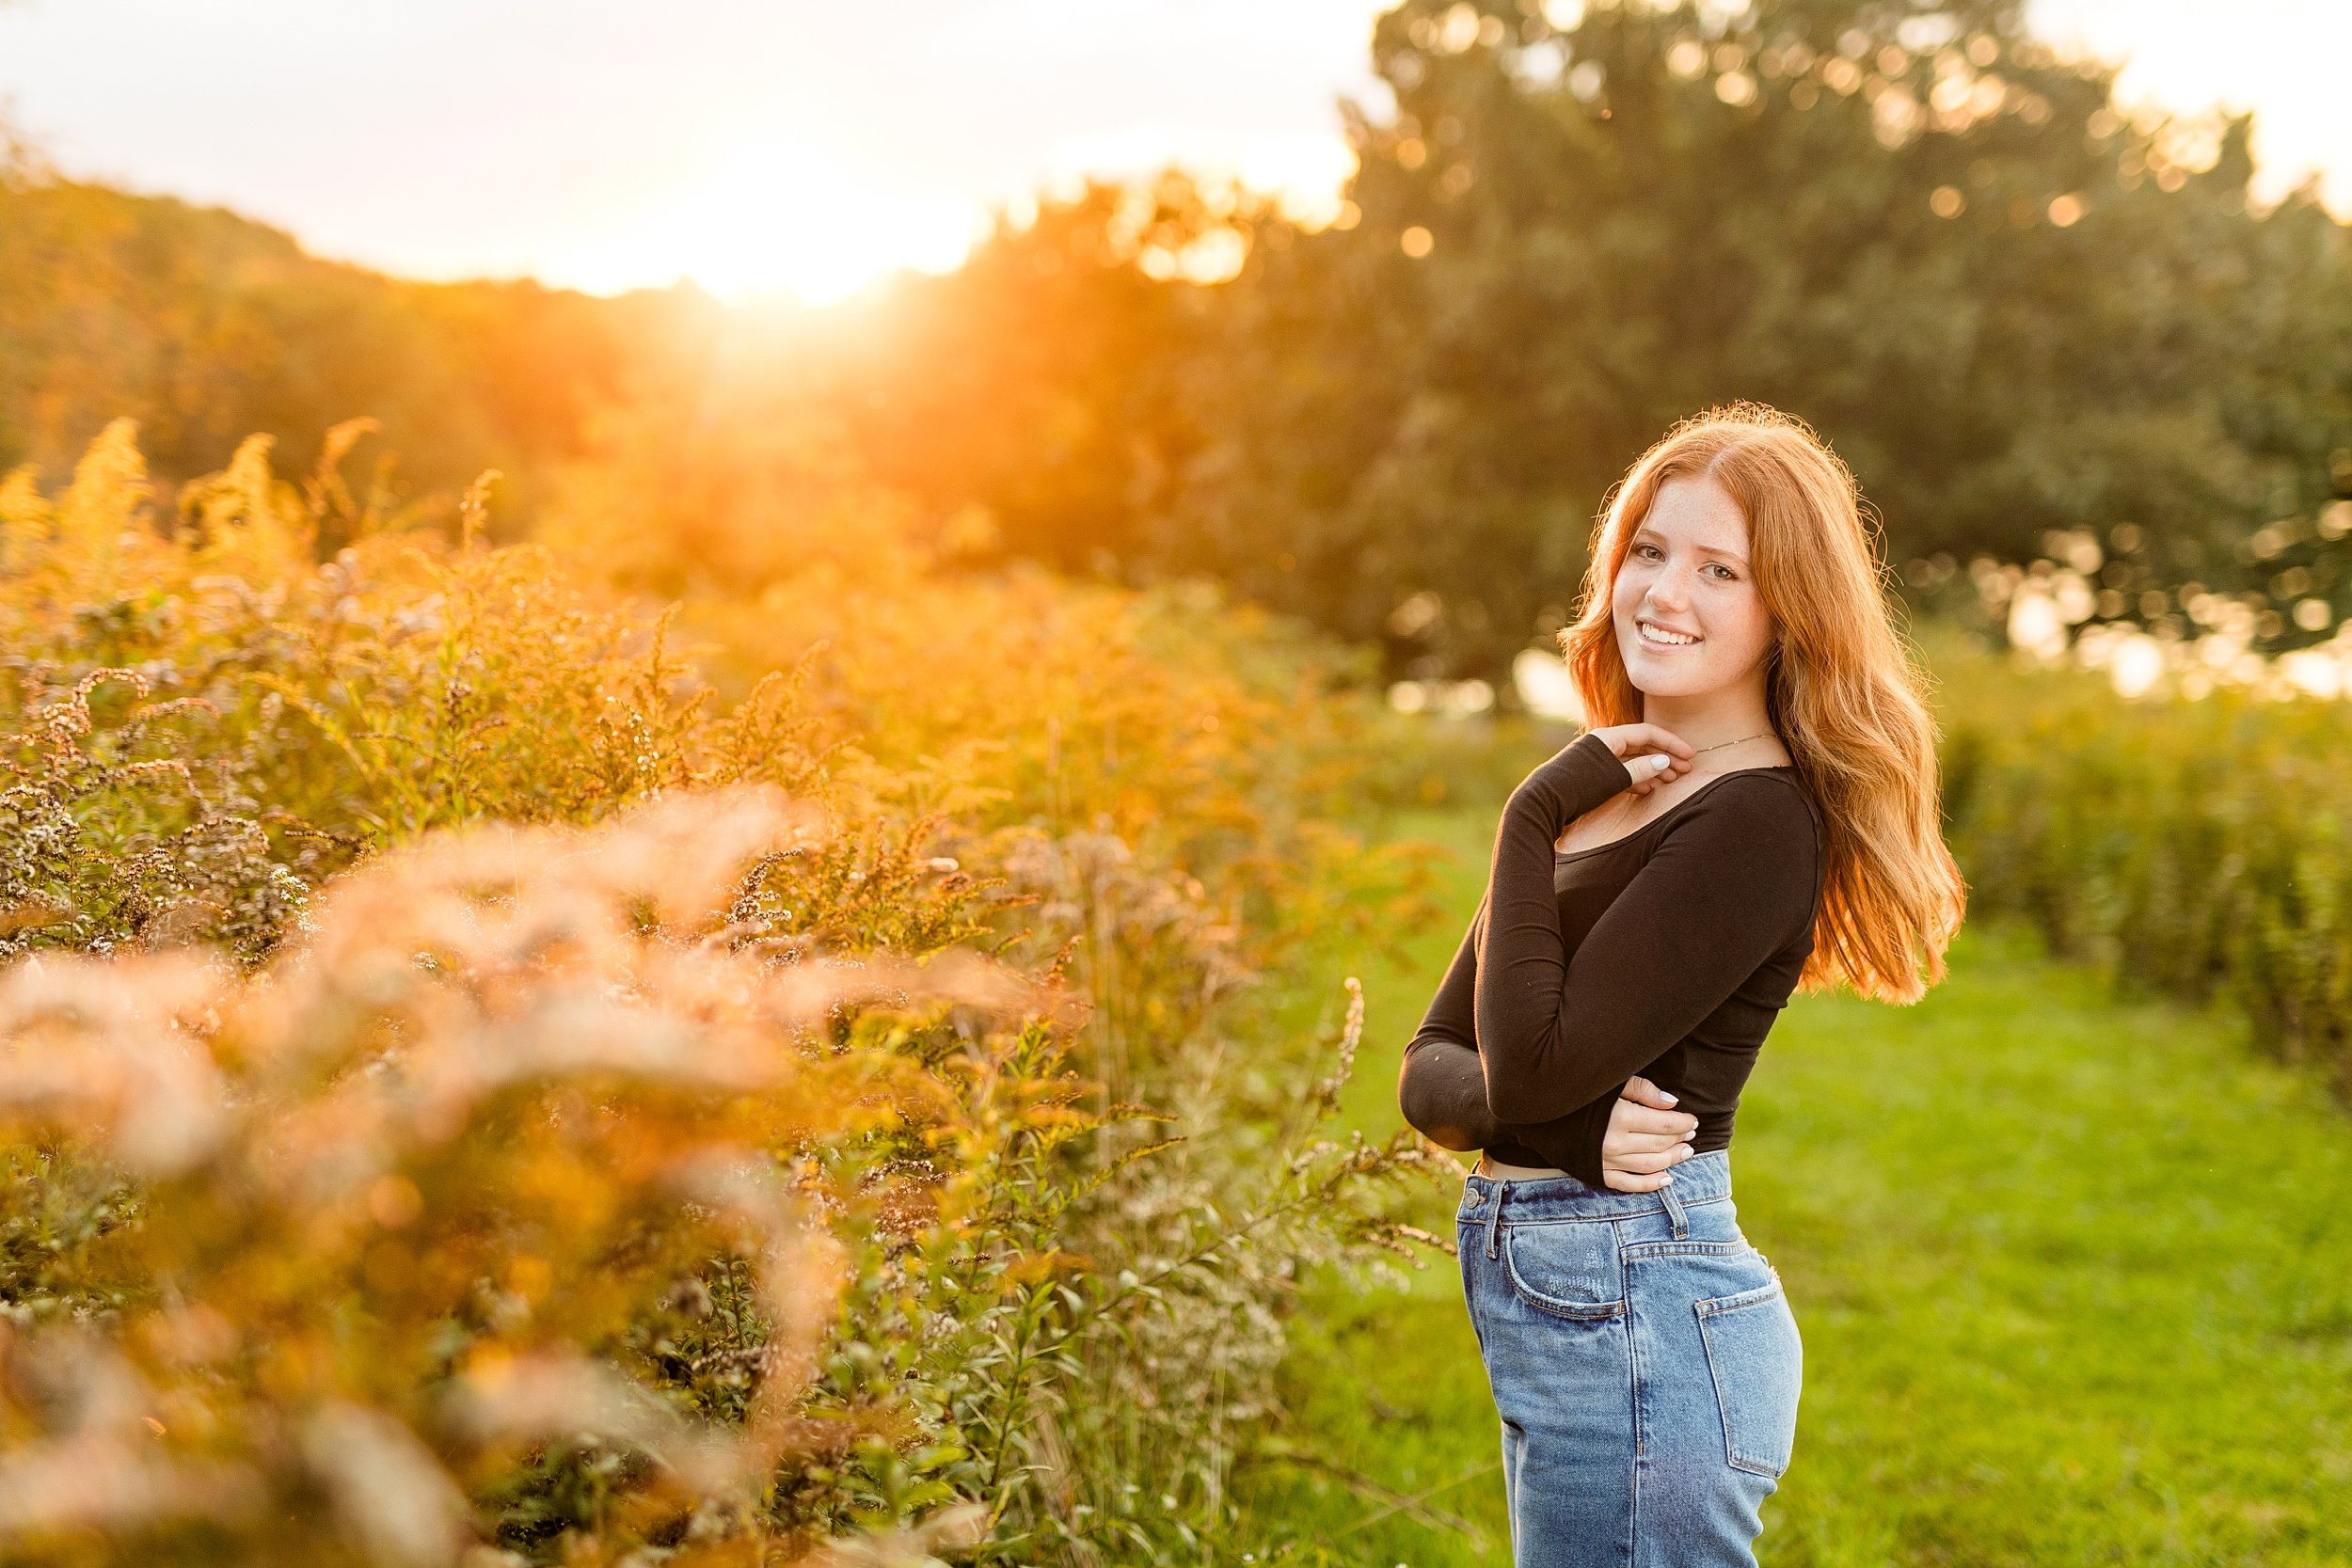 pittsburgh senior photographer, locations for senior photos in pittsburgh, moraine state park senior pictures